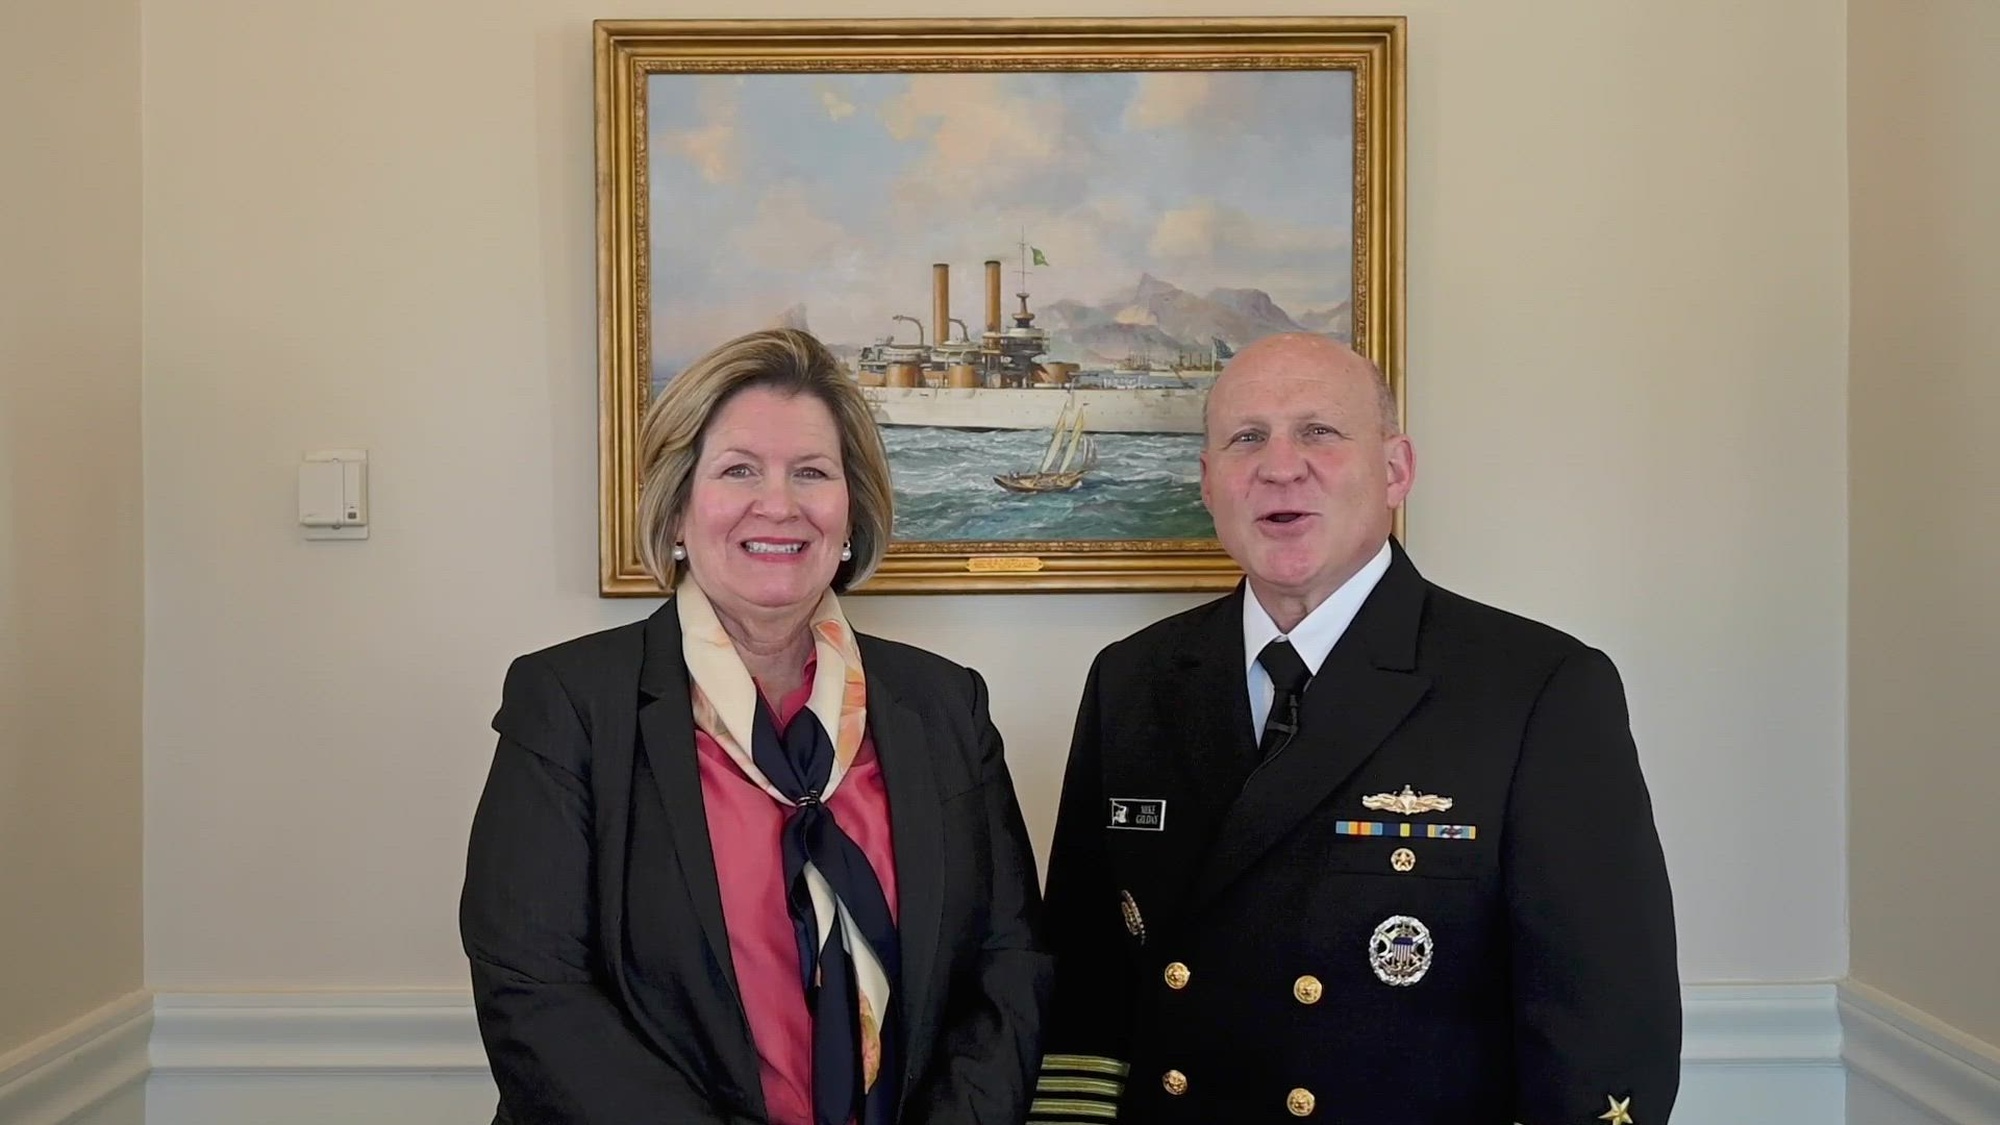 WASHINGTON (Feb. 14, 2023) - Chief of Naval Operations Adm. Mike Gilday and his wife Linda issue a message to the fleet for Black History Month 2023. (U.S. Navy video by Mass Communication Specialist 1st Class Michael B. Zingaro/released)